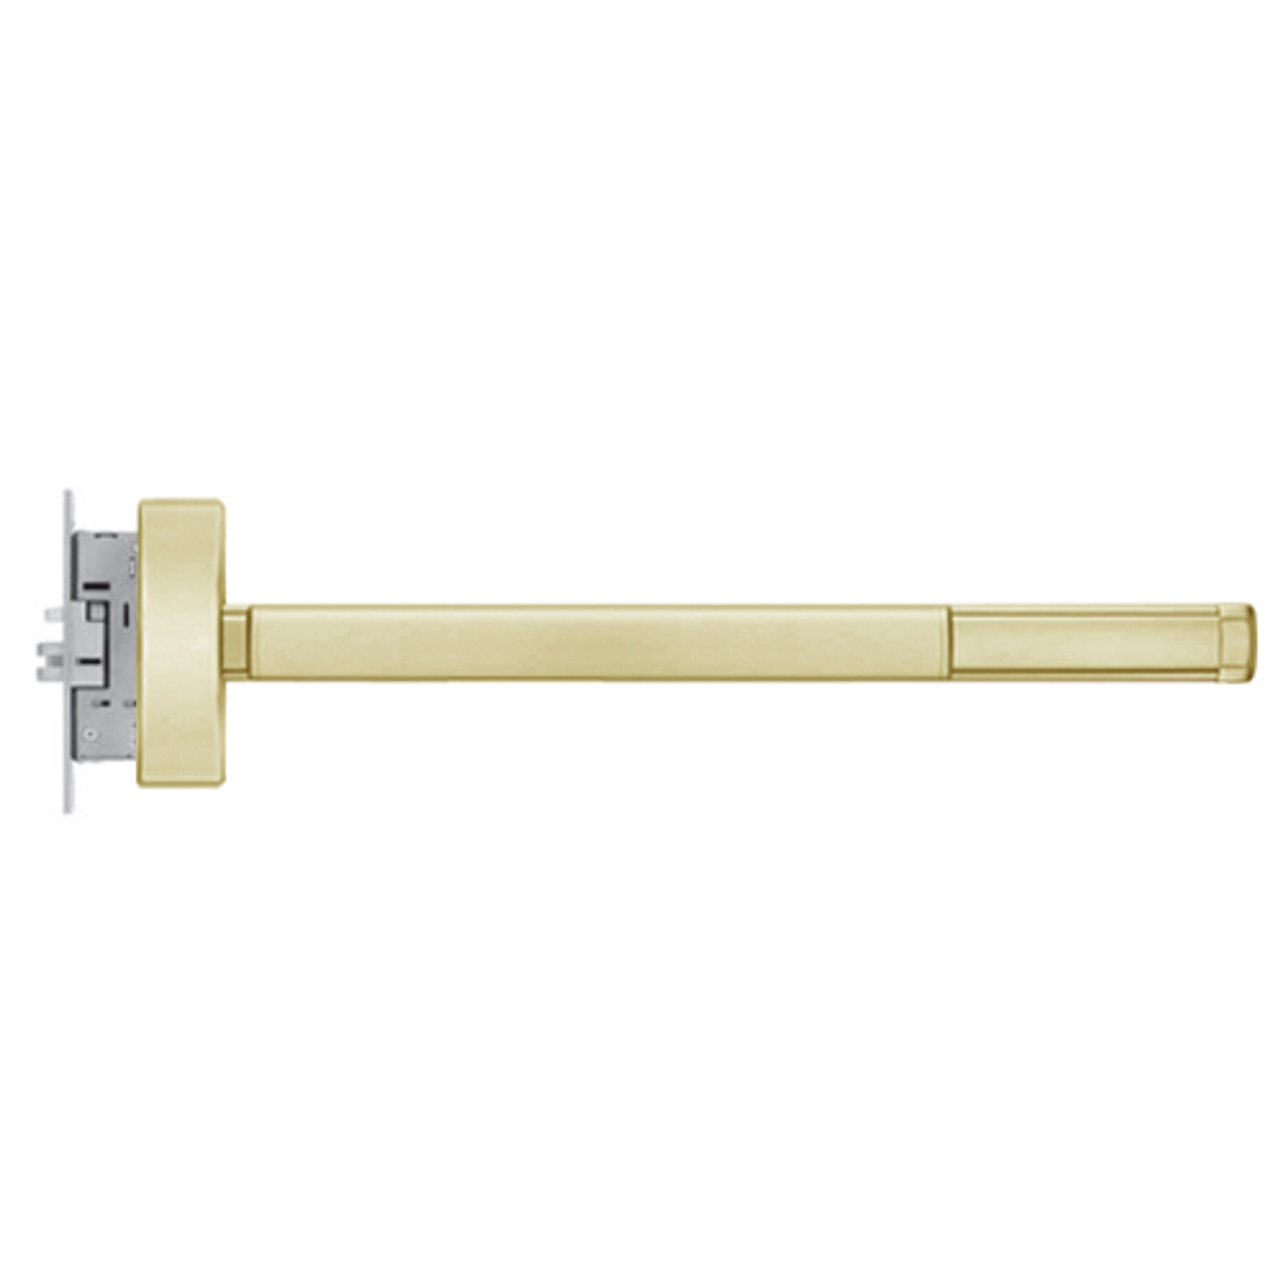 TSFL2308-RHR-606-48 PHI 2300 Series Fire Rated Apex Mortise Exit Device with Touchbar Monitoring Switch Prepped for Key Controls Lever/Knob in Satin Brass Finish